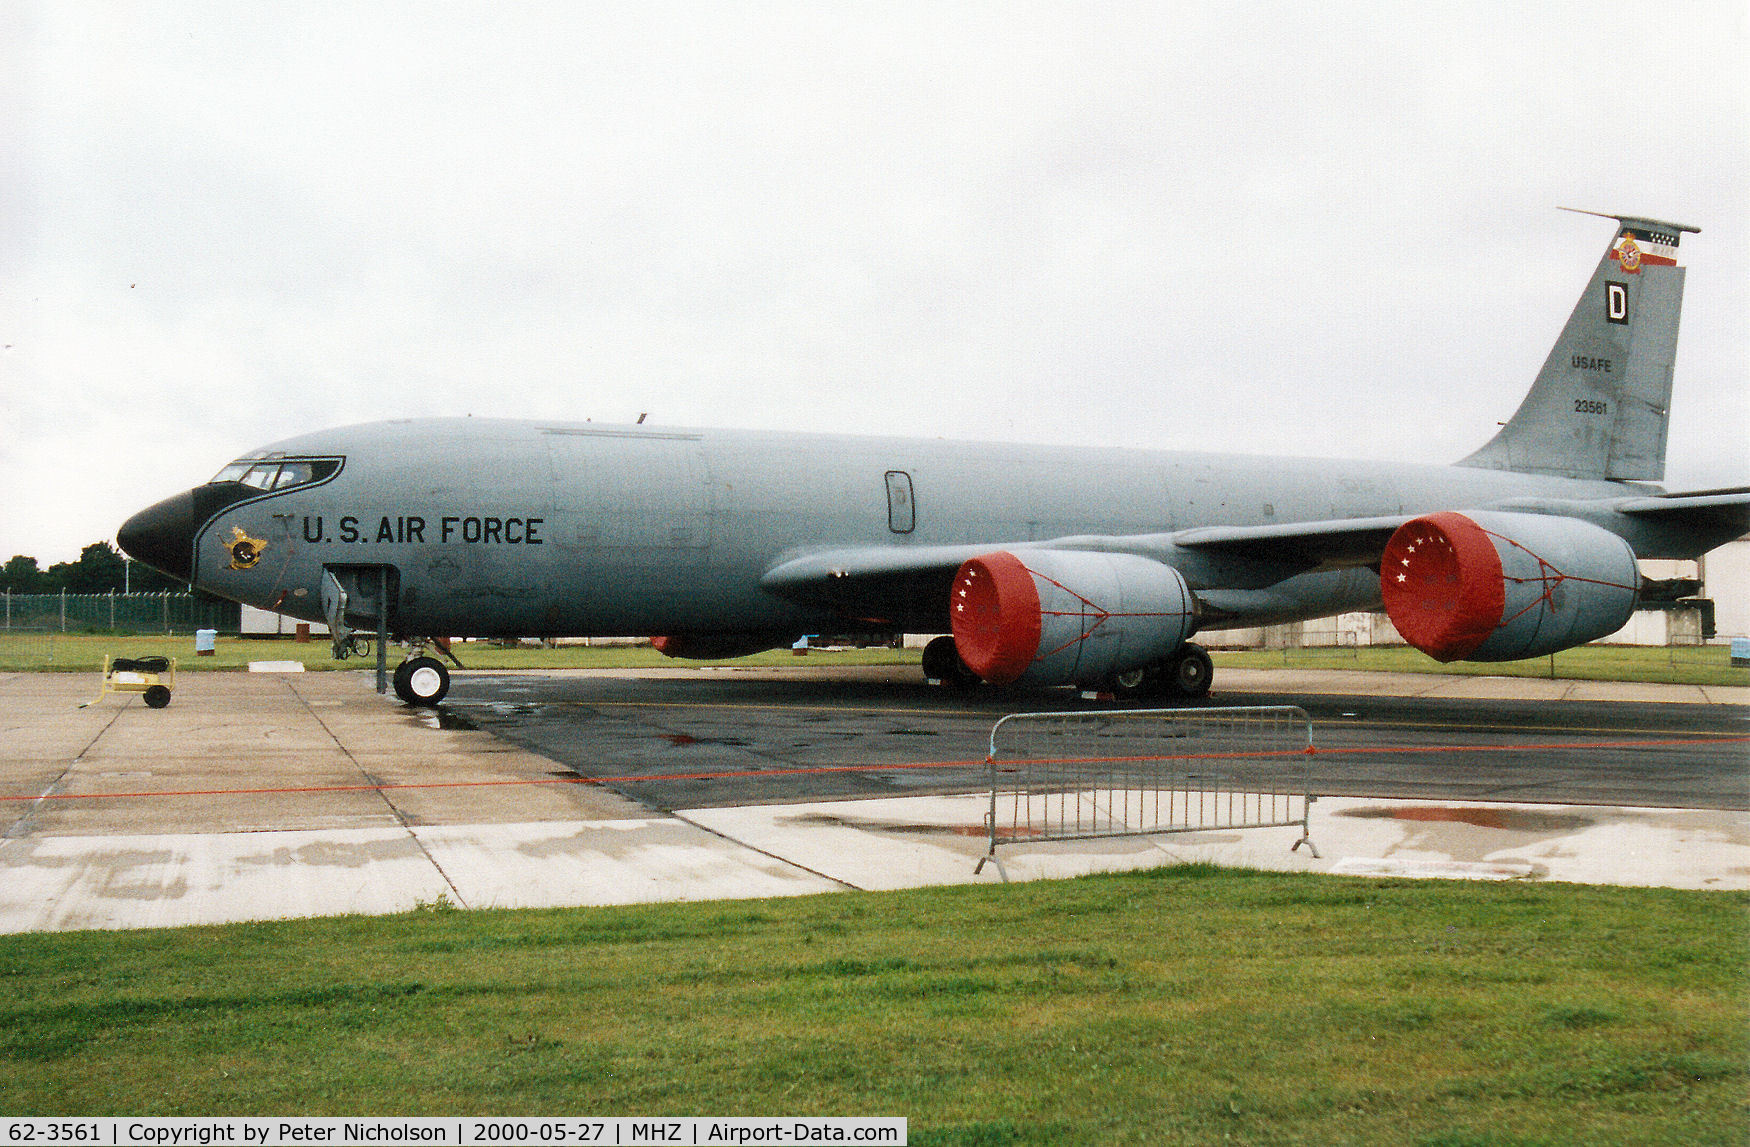 62-3561, 1963 Boeing KC-135E-BN Stratotanker C/N 18544, KC-135R Stratotanker of 351st Air Refuelling Squadron/100th Air Refuelling Wing on display at the 2000 RAF Mildenhall Air Fete.